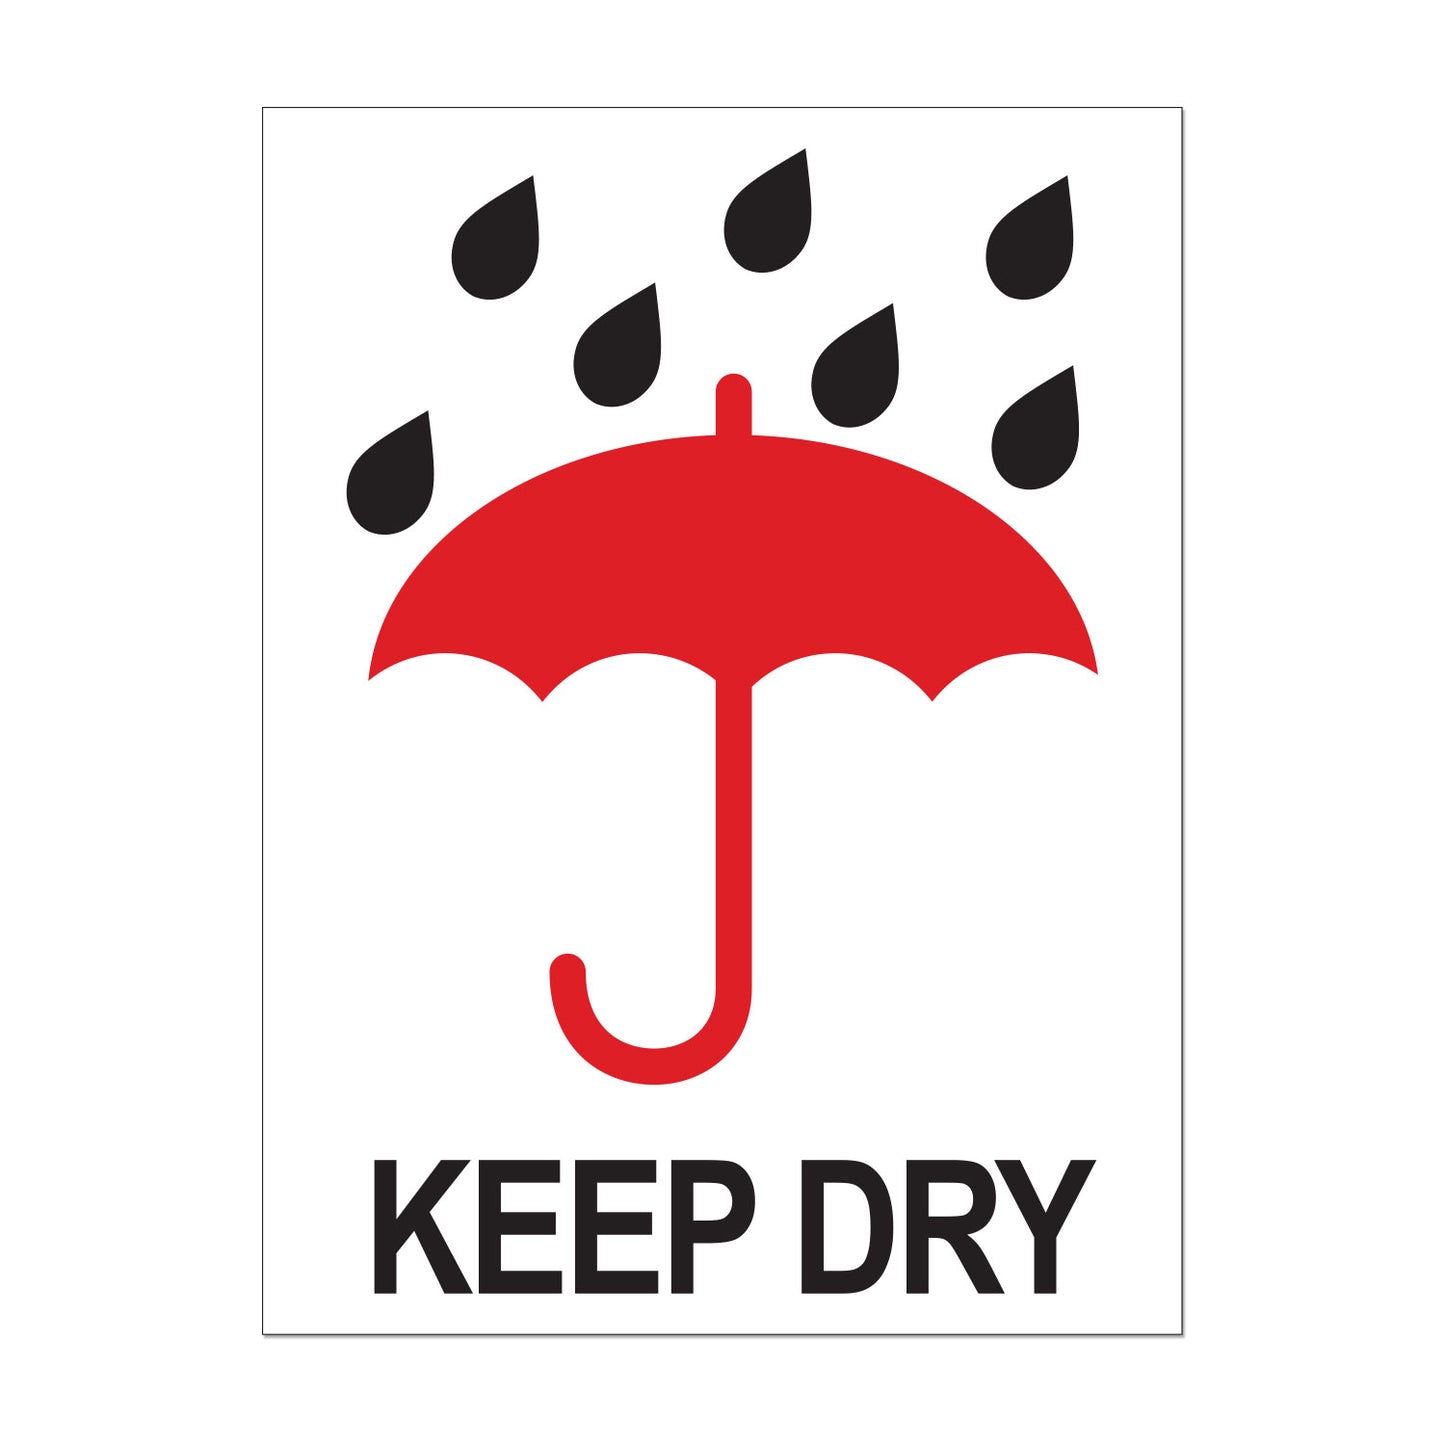 3 x 4 inch | Shipping & Handling: Keep Dry Stickers